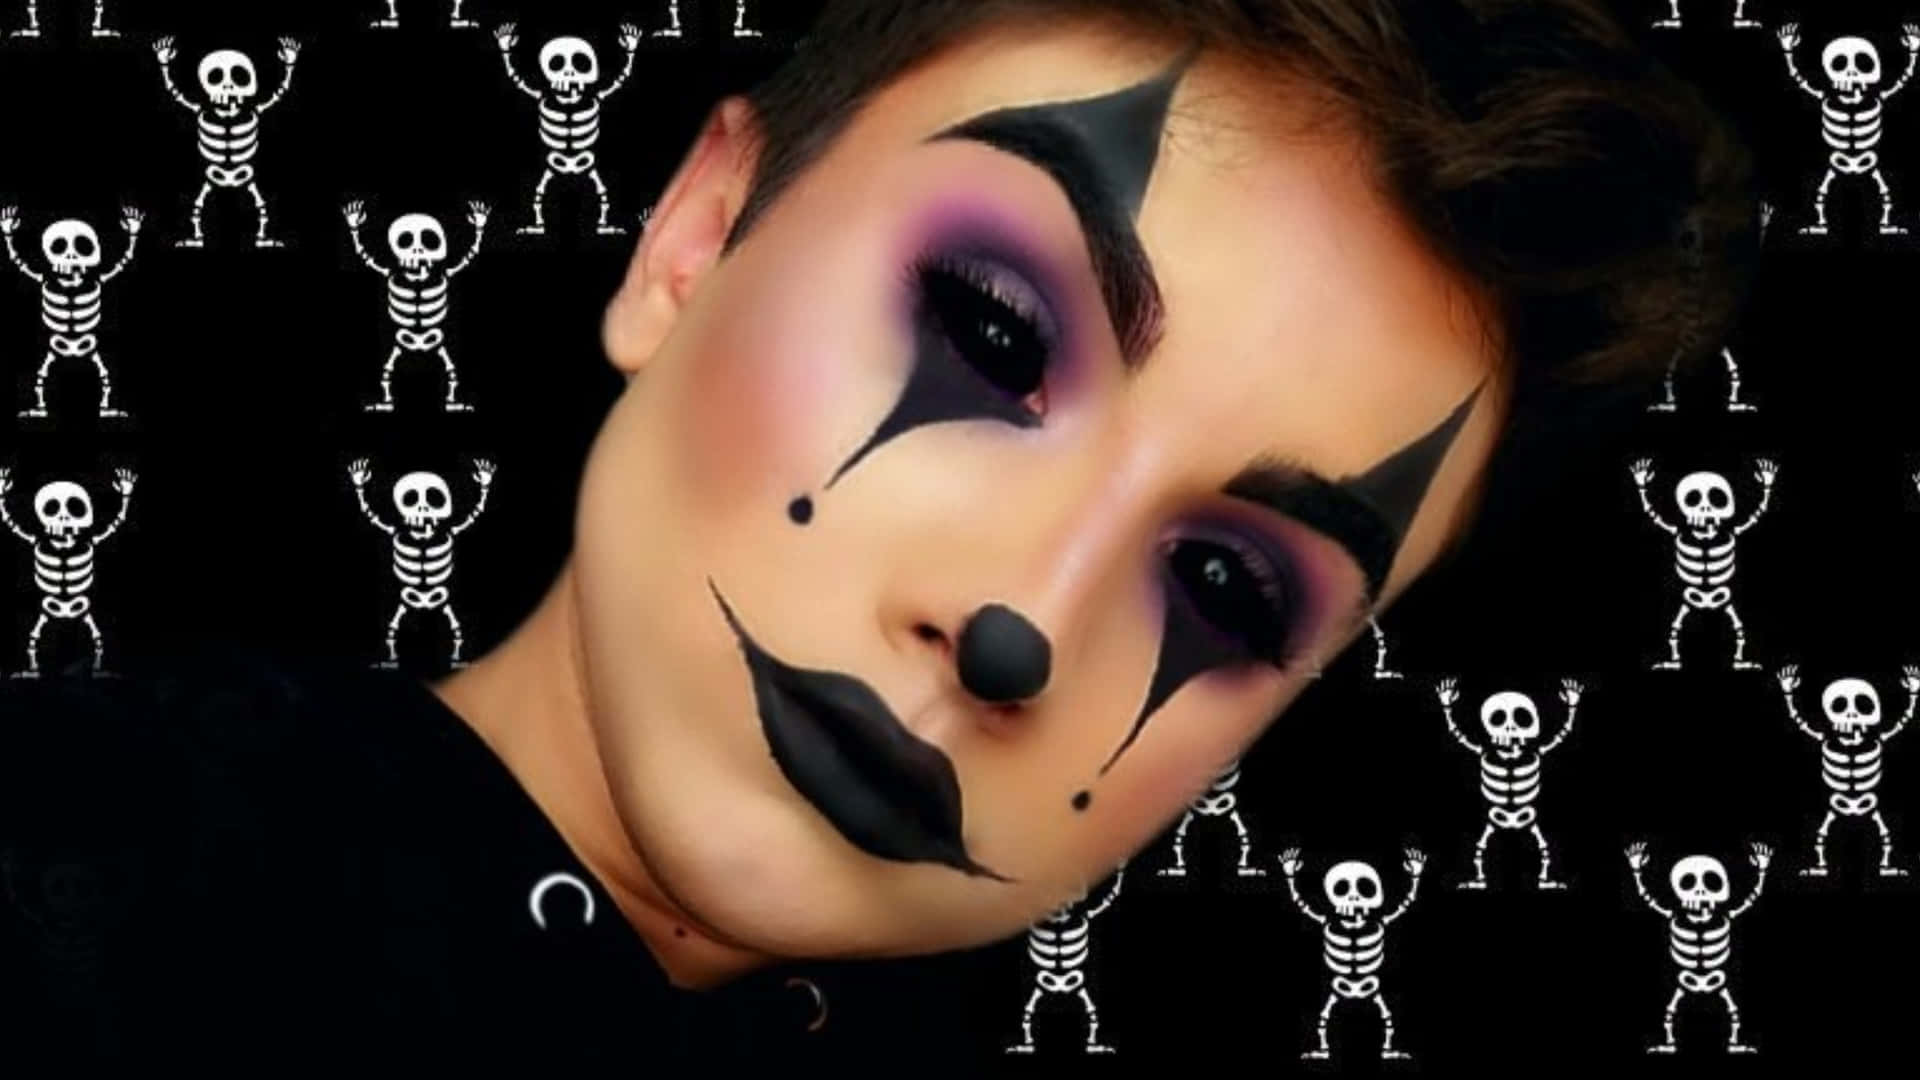 Transform into an eerie look this Halloween with creative makeup Wallpaper